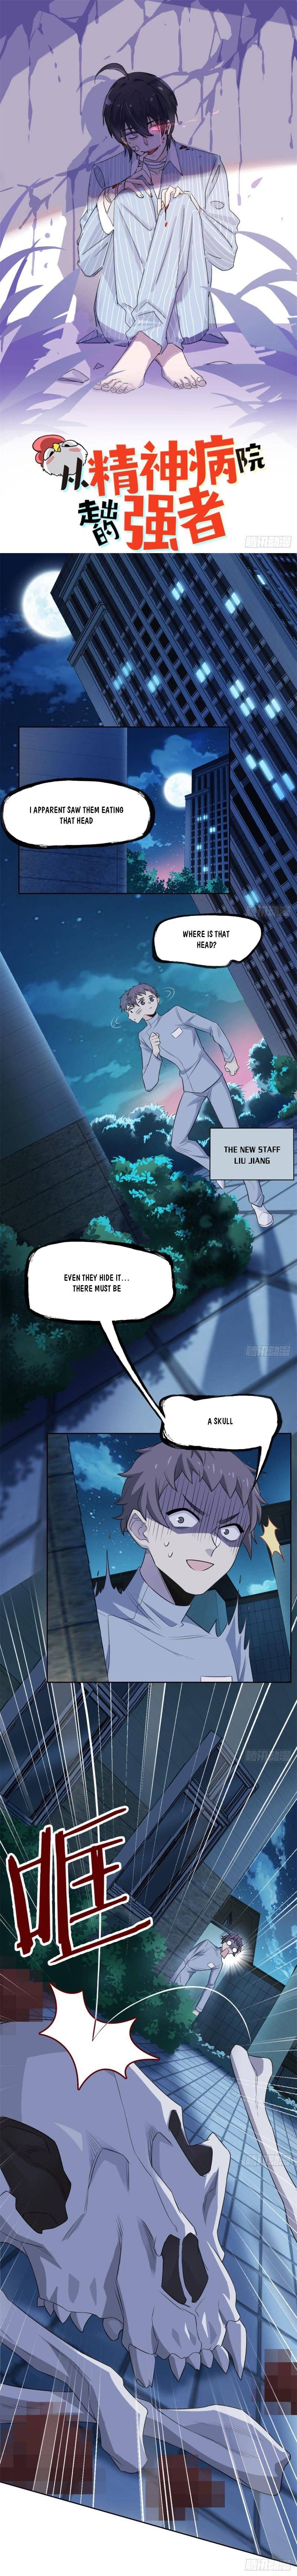 The Strong Man From The Mental Hospital Chapter 36 page 2